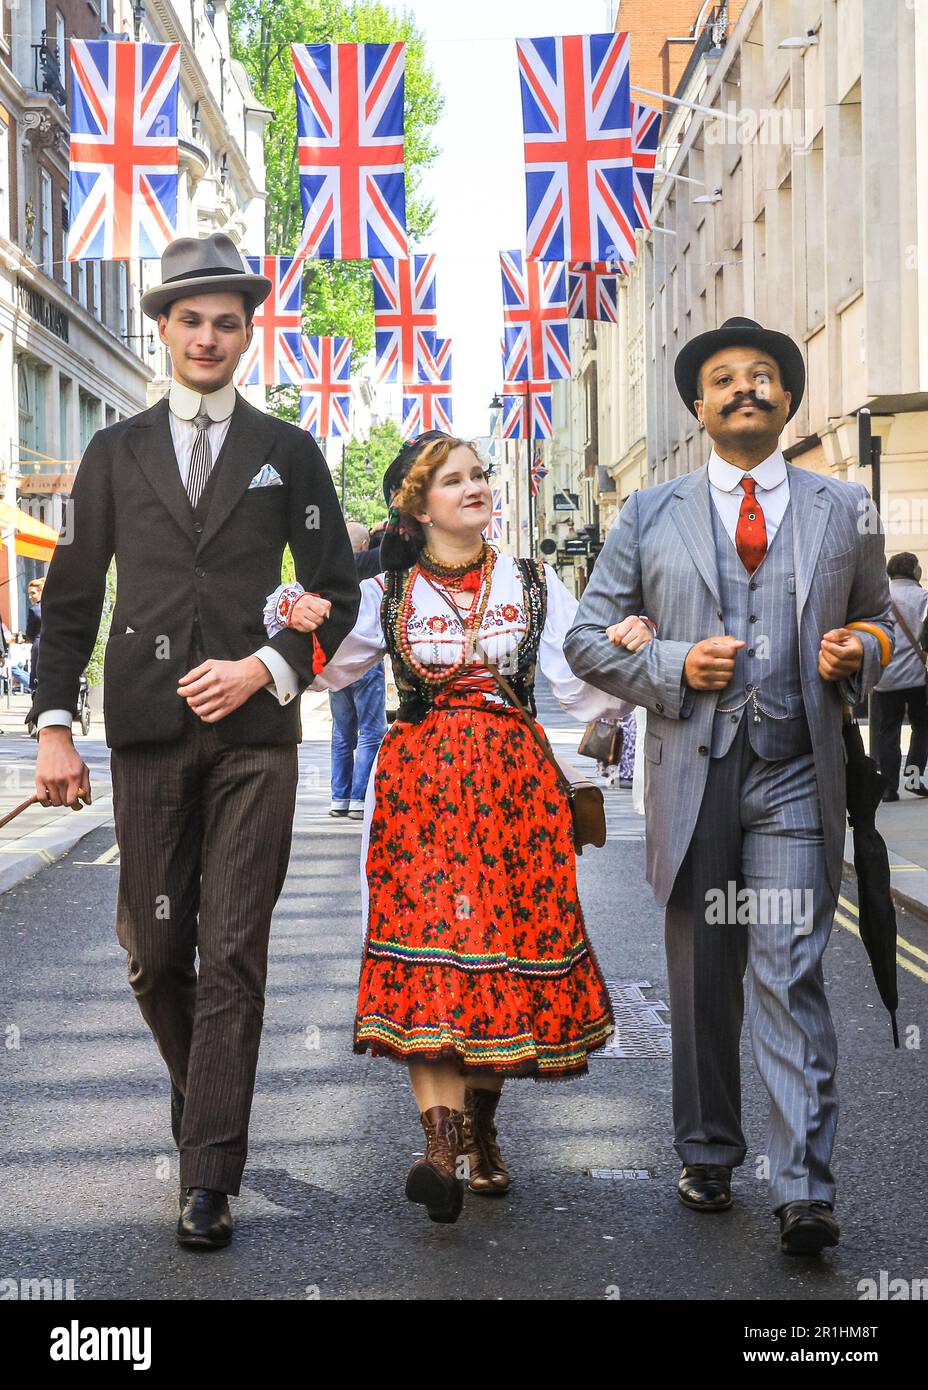 London, UK. 14th May, 2023. Two chaps gentlemanly walk with a young lady in Polish folk dress along Jermyn Street. The annual Grand Flaneur Walk sees chaps and chapettes, dandies and quaintrelle in impeccable tailoring and style flanning and sauntering without purpose around St James' and surrounding areas of London. The walk always starts at the statue of socialite dandy Beau Brummell and slowly makes its way around the area. Credit: Imageplotter/Alamy Live News Stock Photo